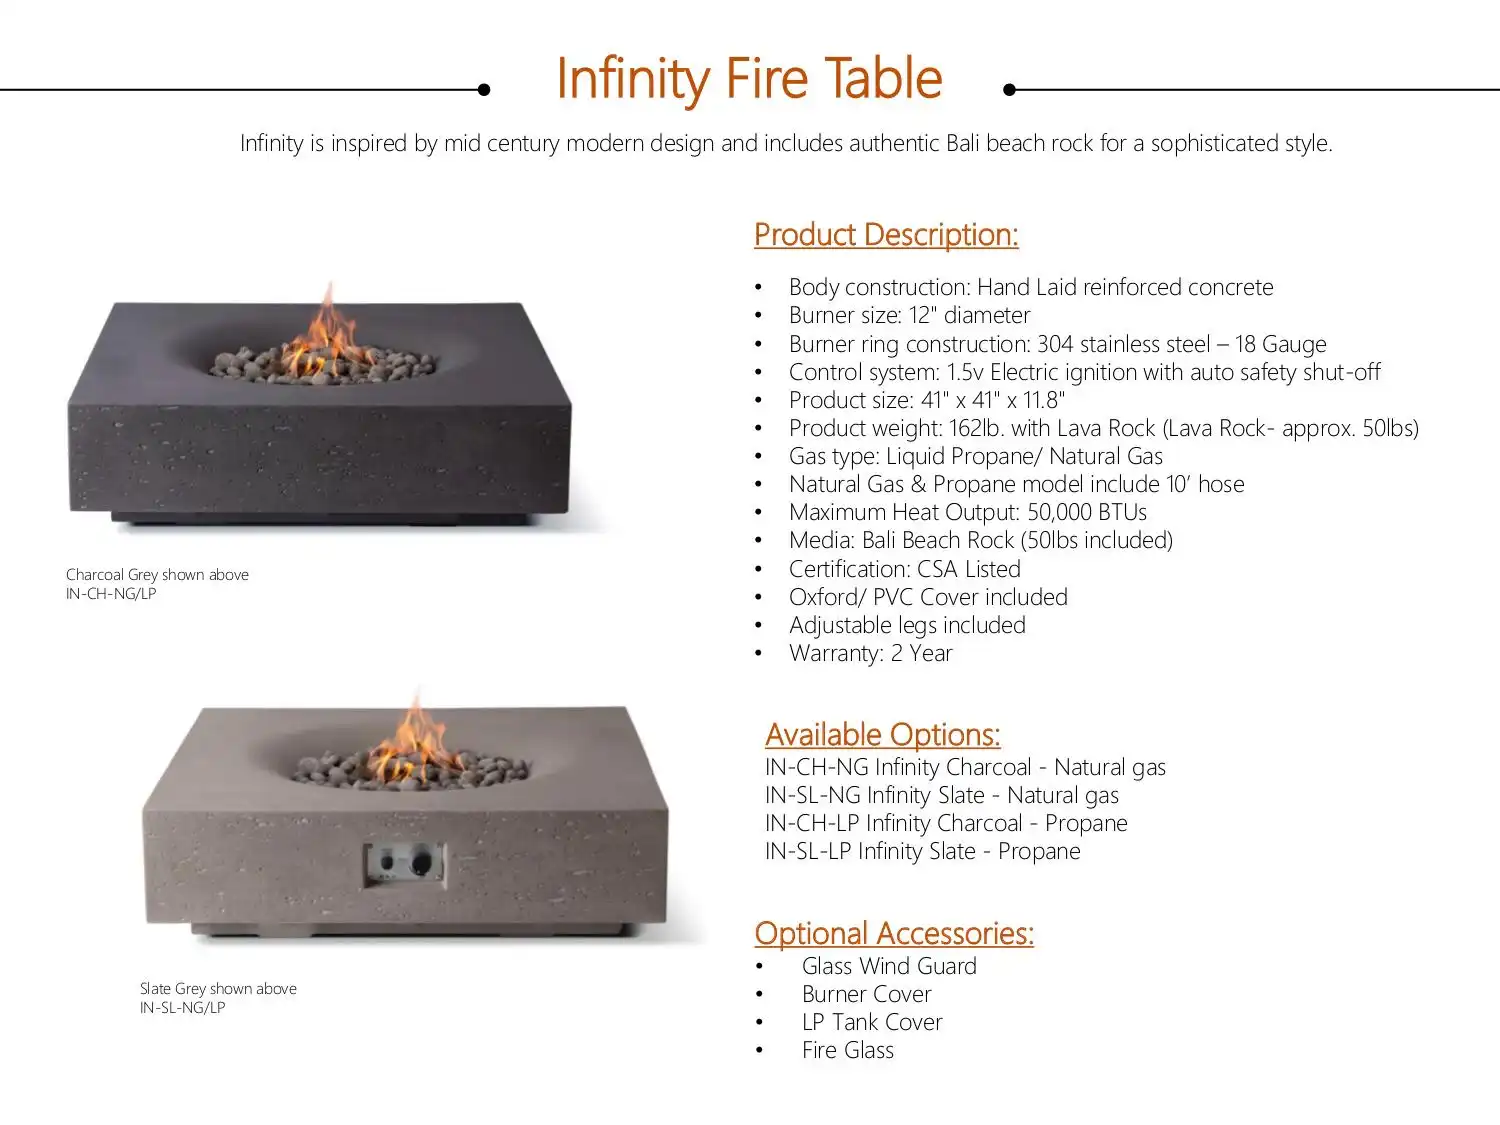 CL INFINITY FIRE TABLE C$ 2,300 by Pyromania